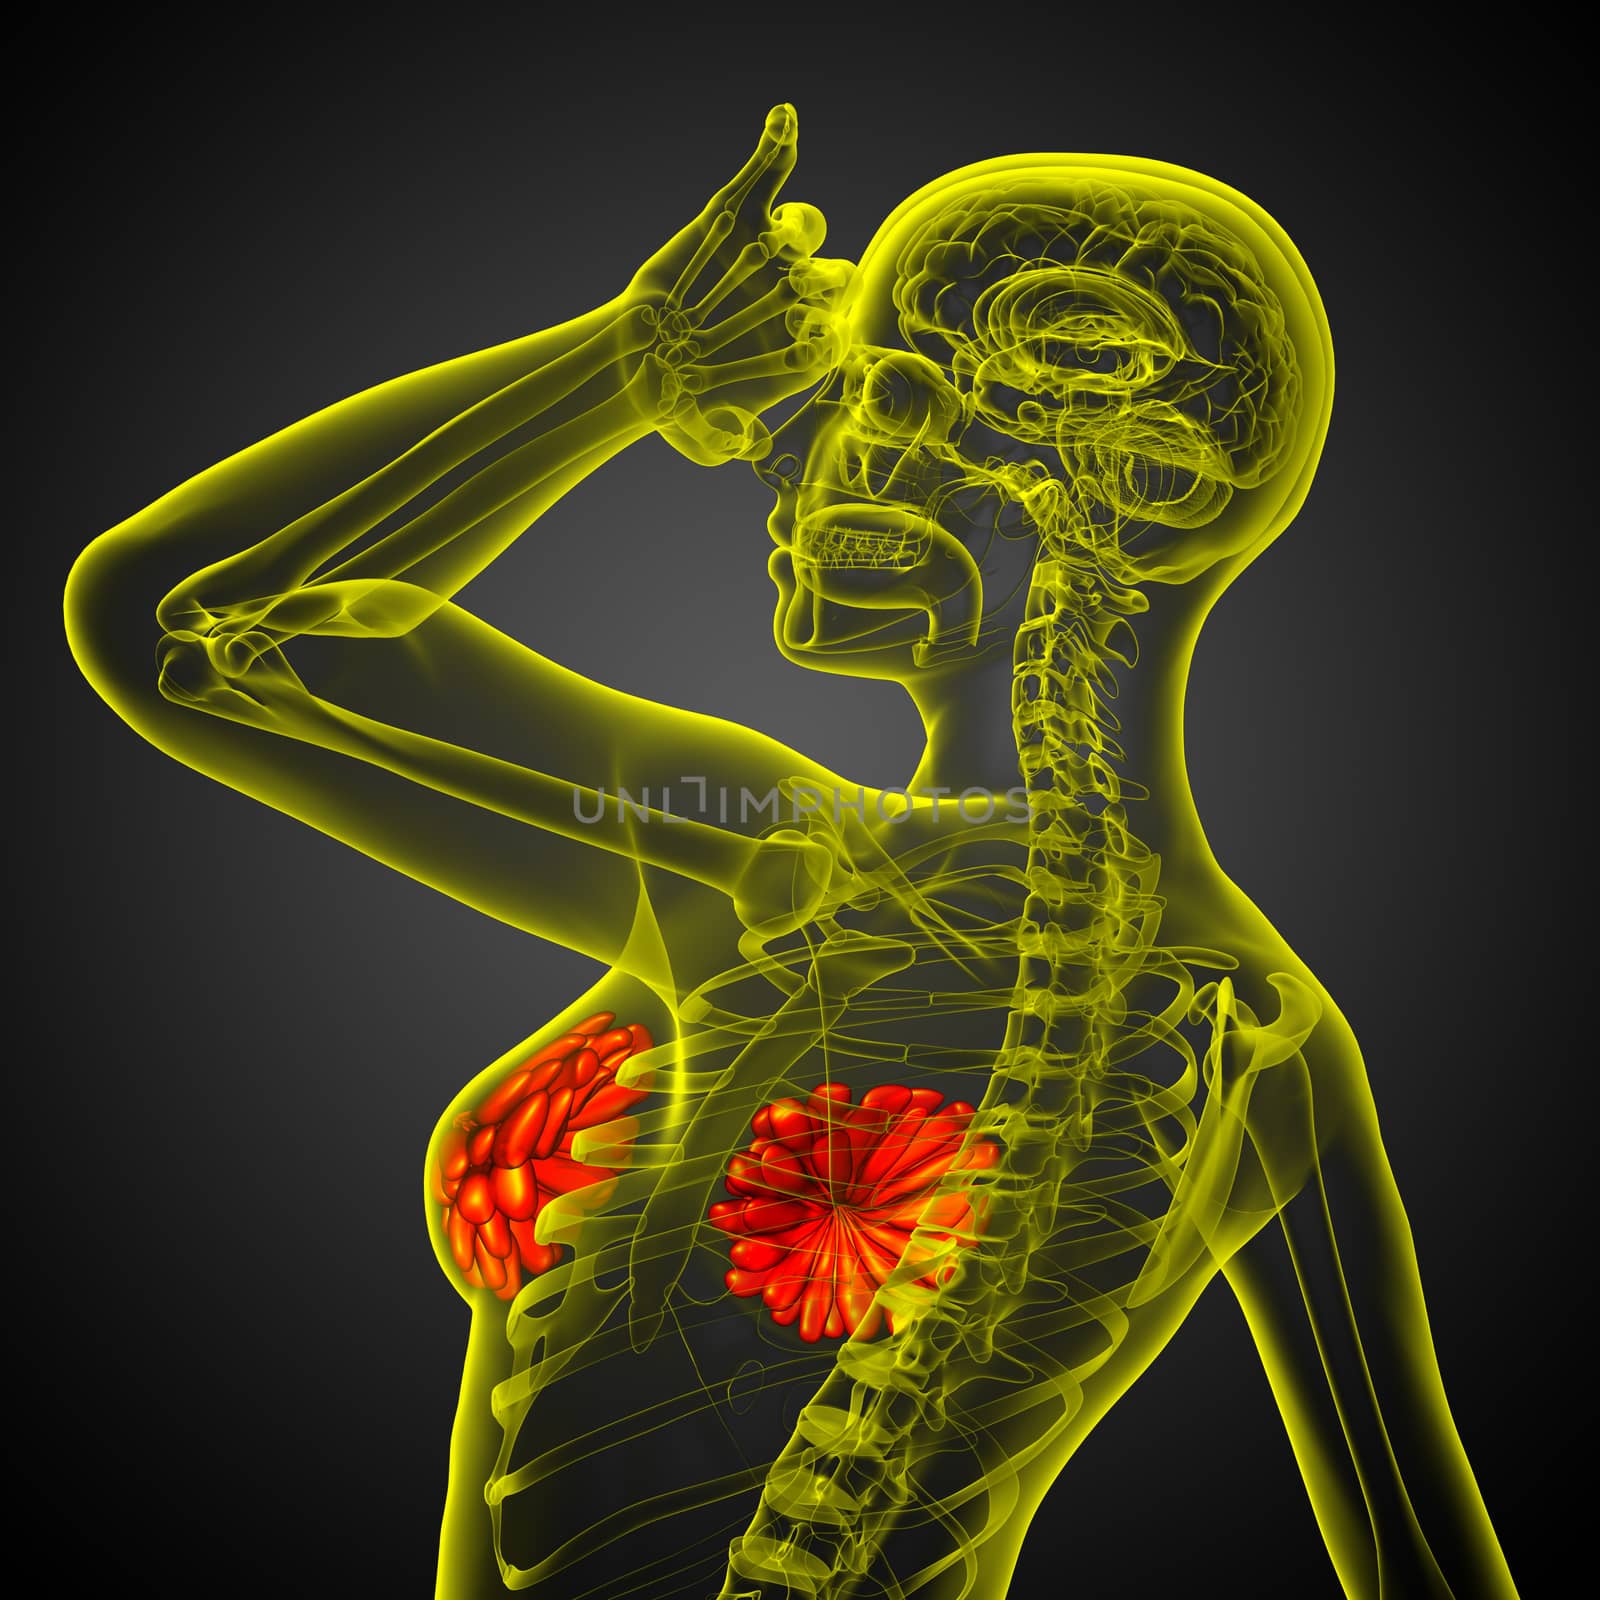 3d render medical illustration of the human breast by maya2008